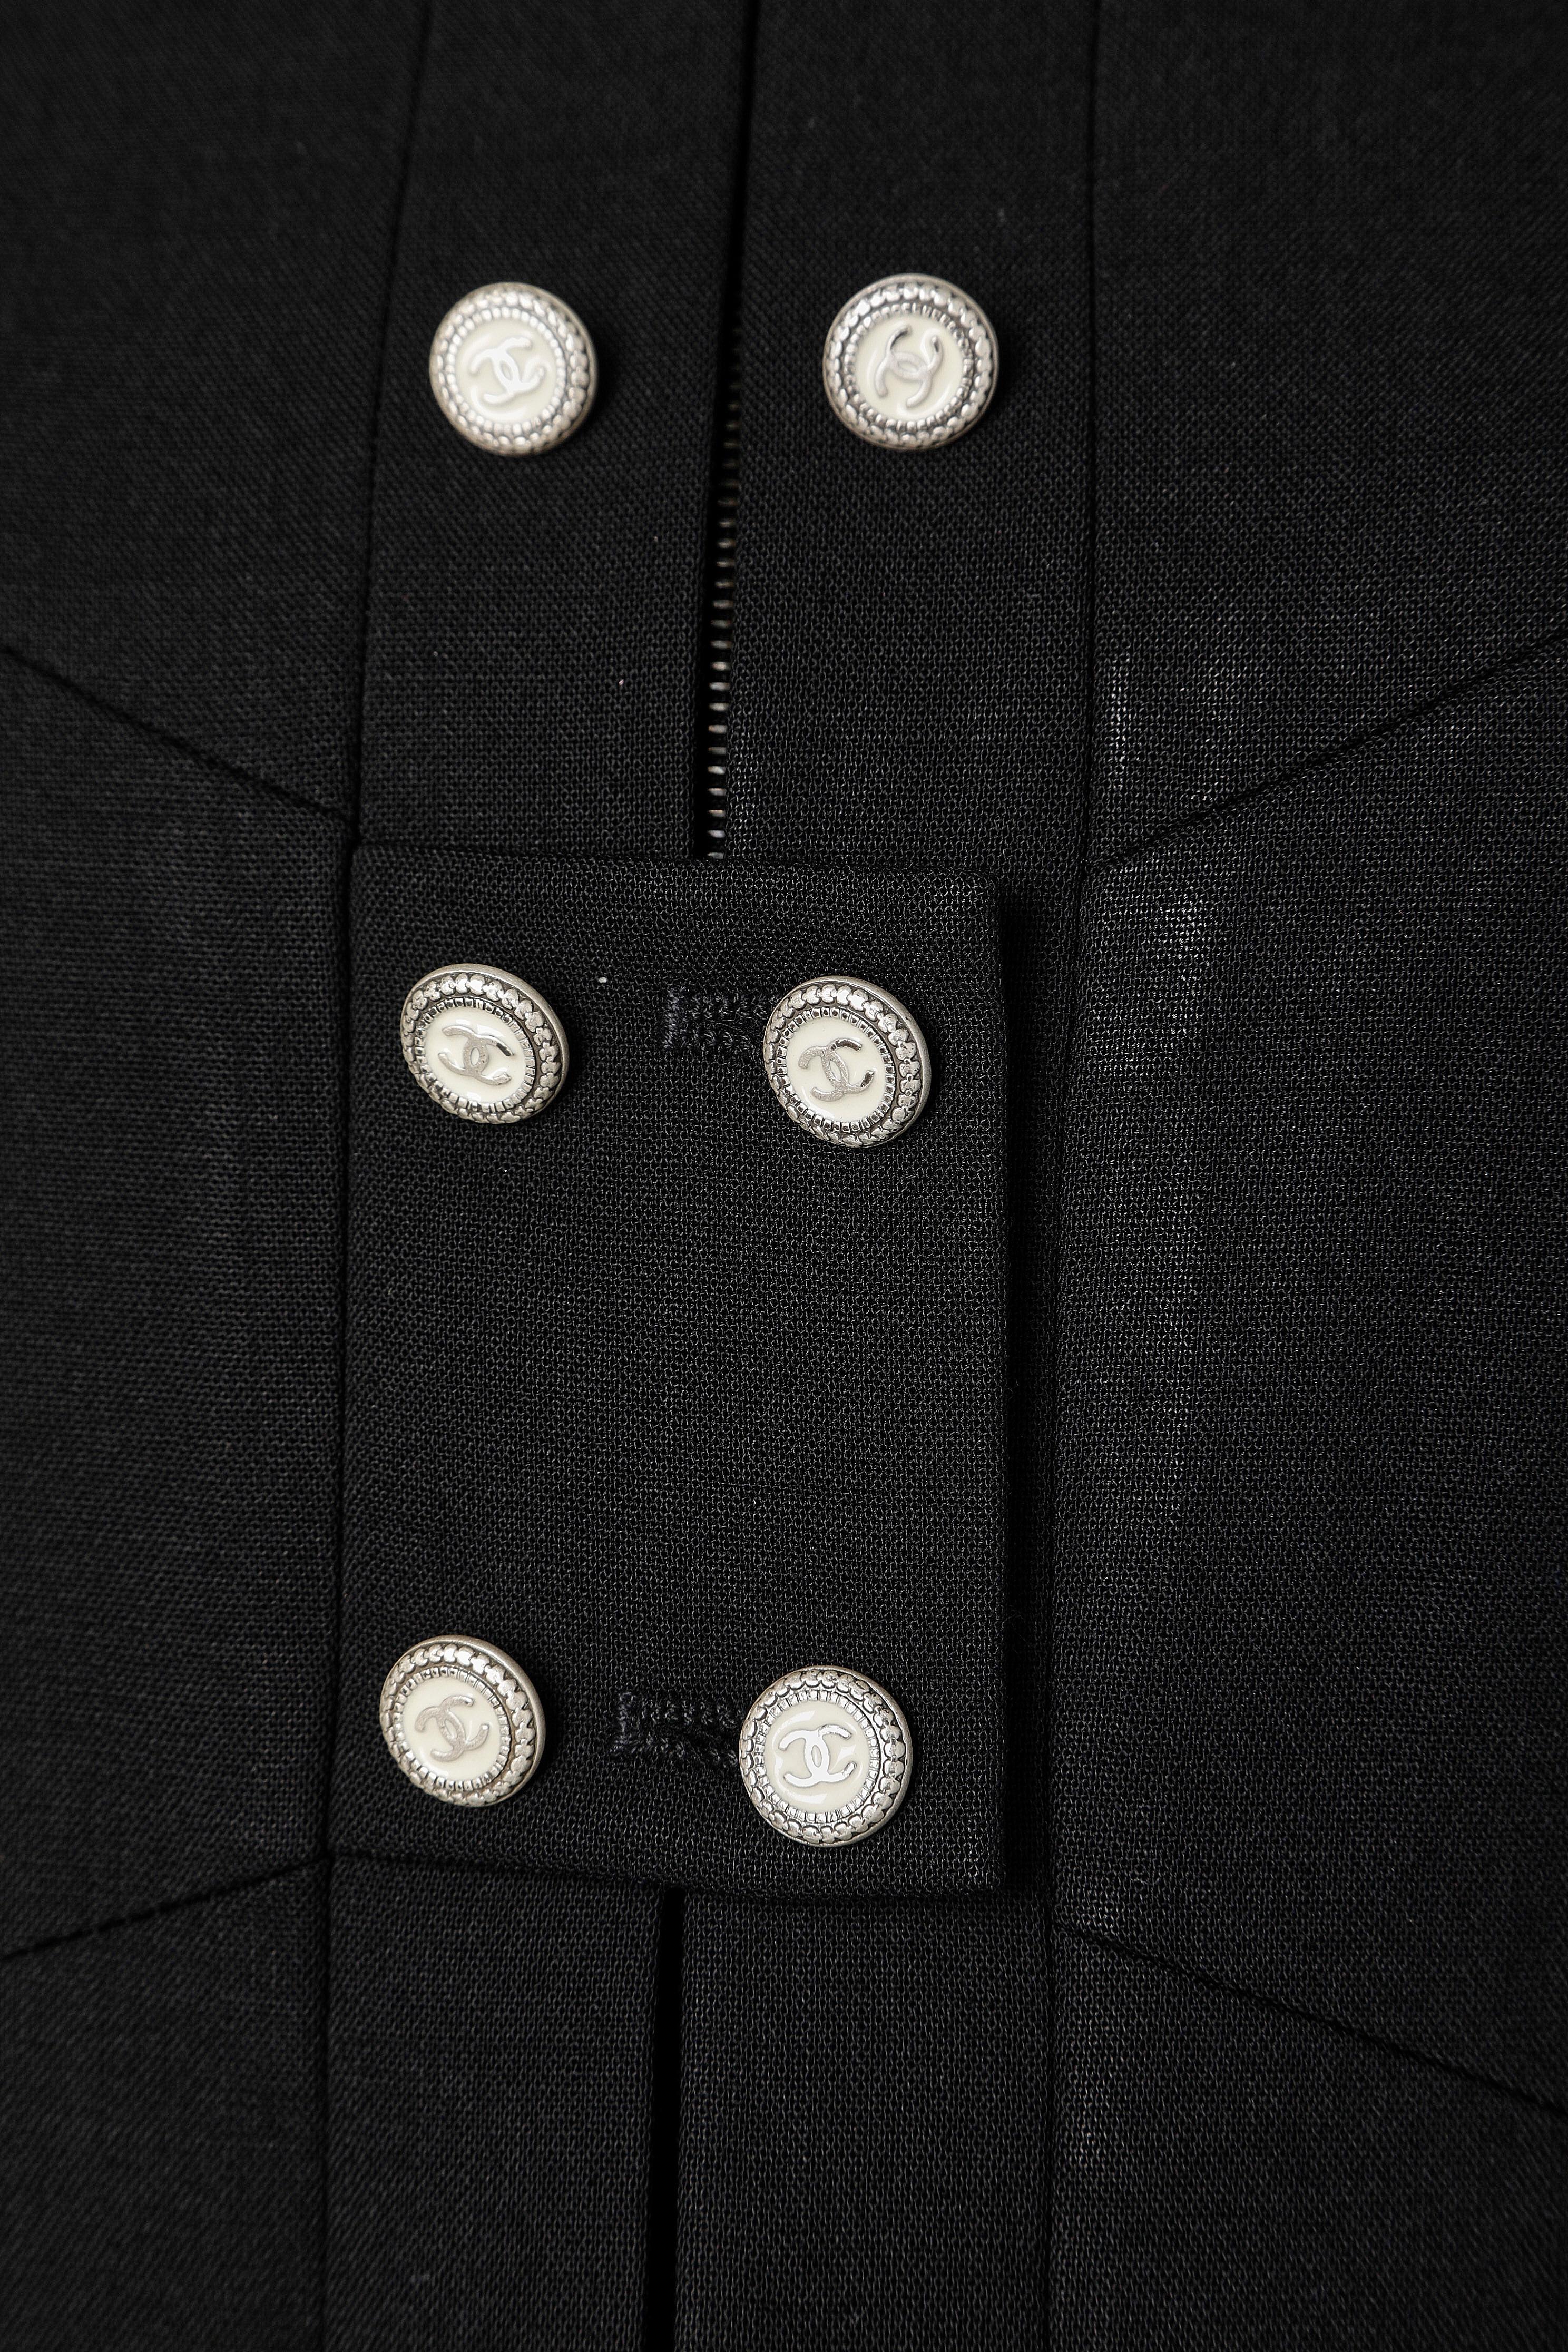 Black officier's style  jacket with double row of branded buttons.
Size 34 (XS) 